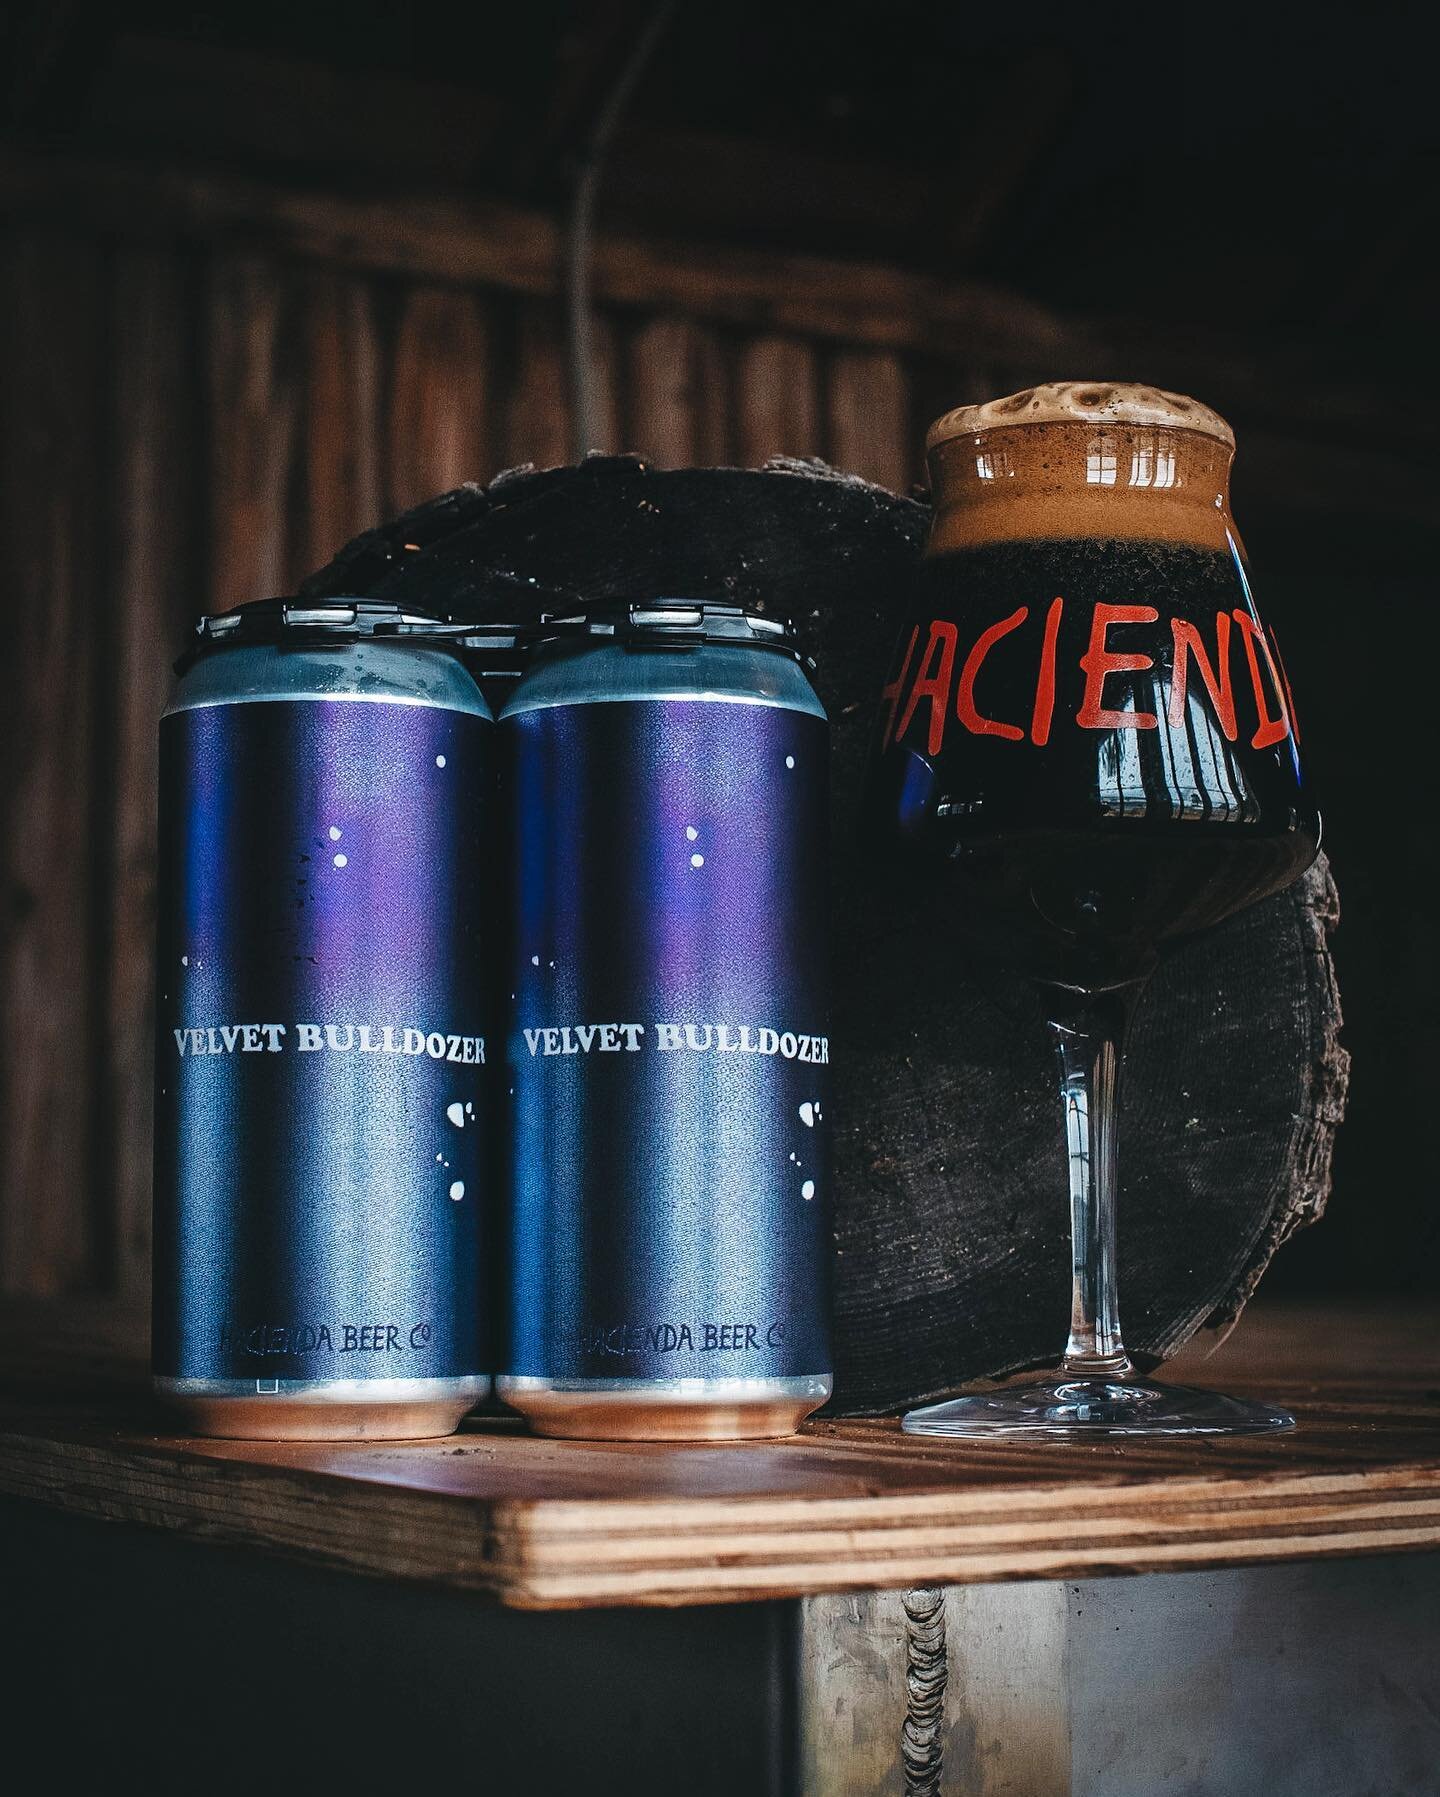 BLACK FRIDAY. 😈

On Draft Today:
Velvet Bulldozer 2022 - Imperial stout conditioned on cacao nibs, Madagascar + Ugandan vanilla bean + @iselycoffe espresso. 12% ABV. 2-packs will be available in both taprooms. 

BBA Velvet Bulldozer 2022 - Imperial 